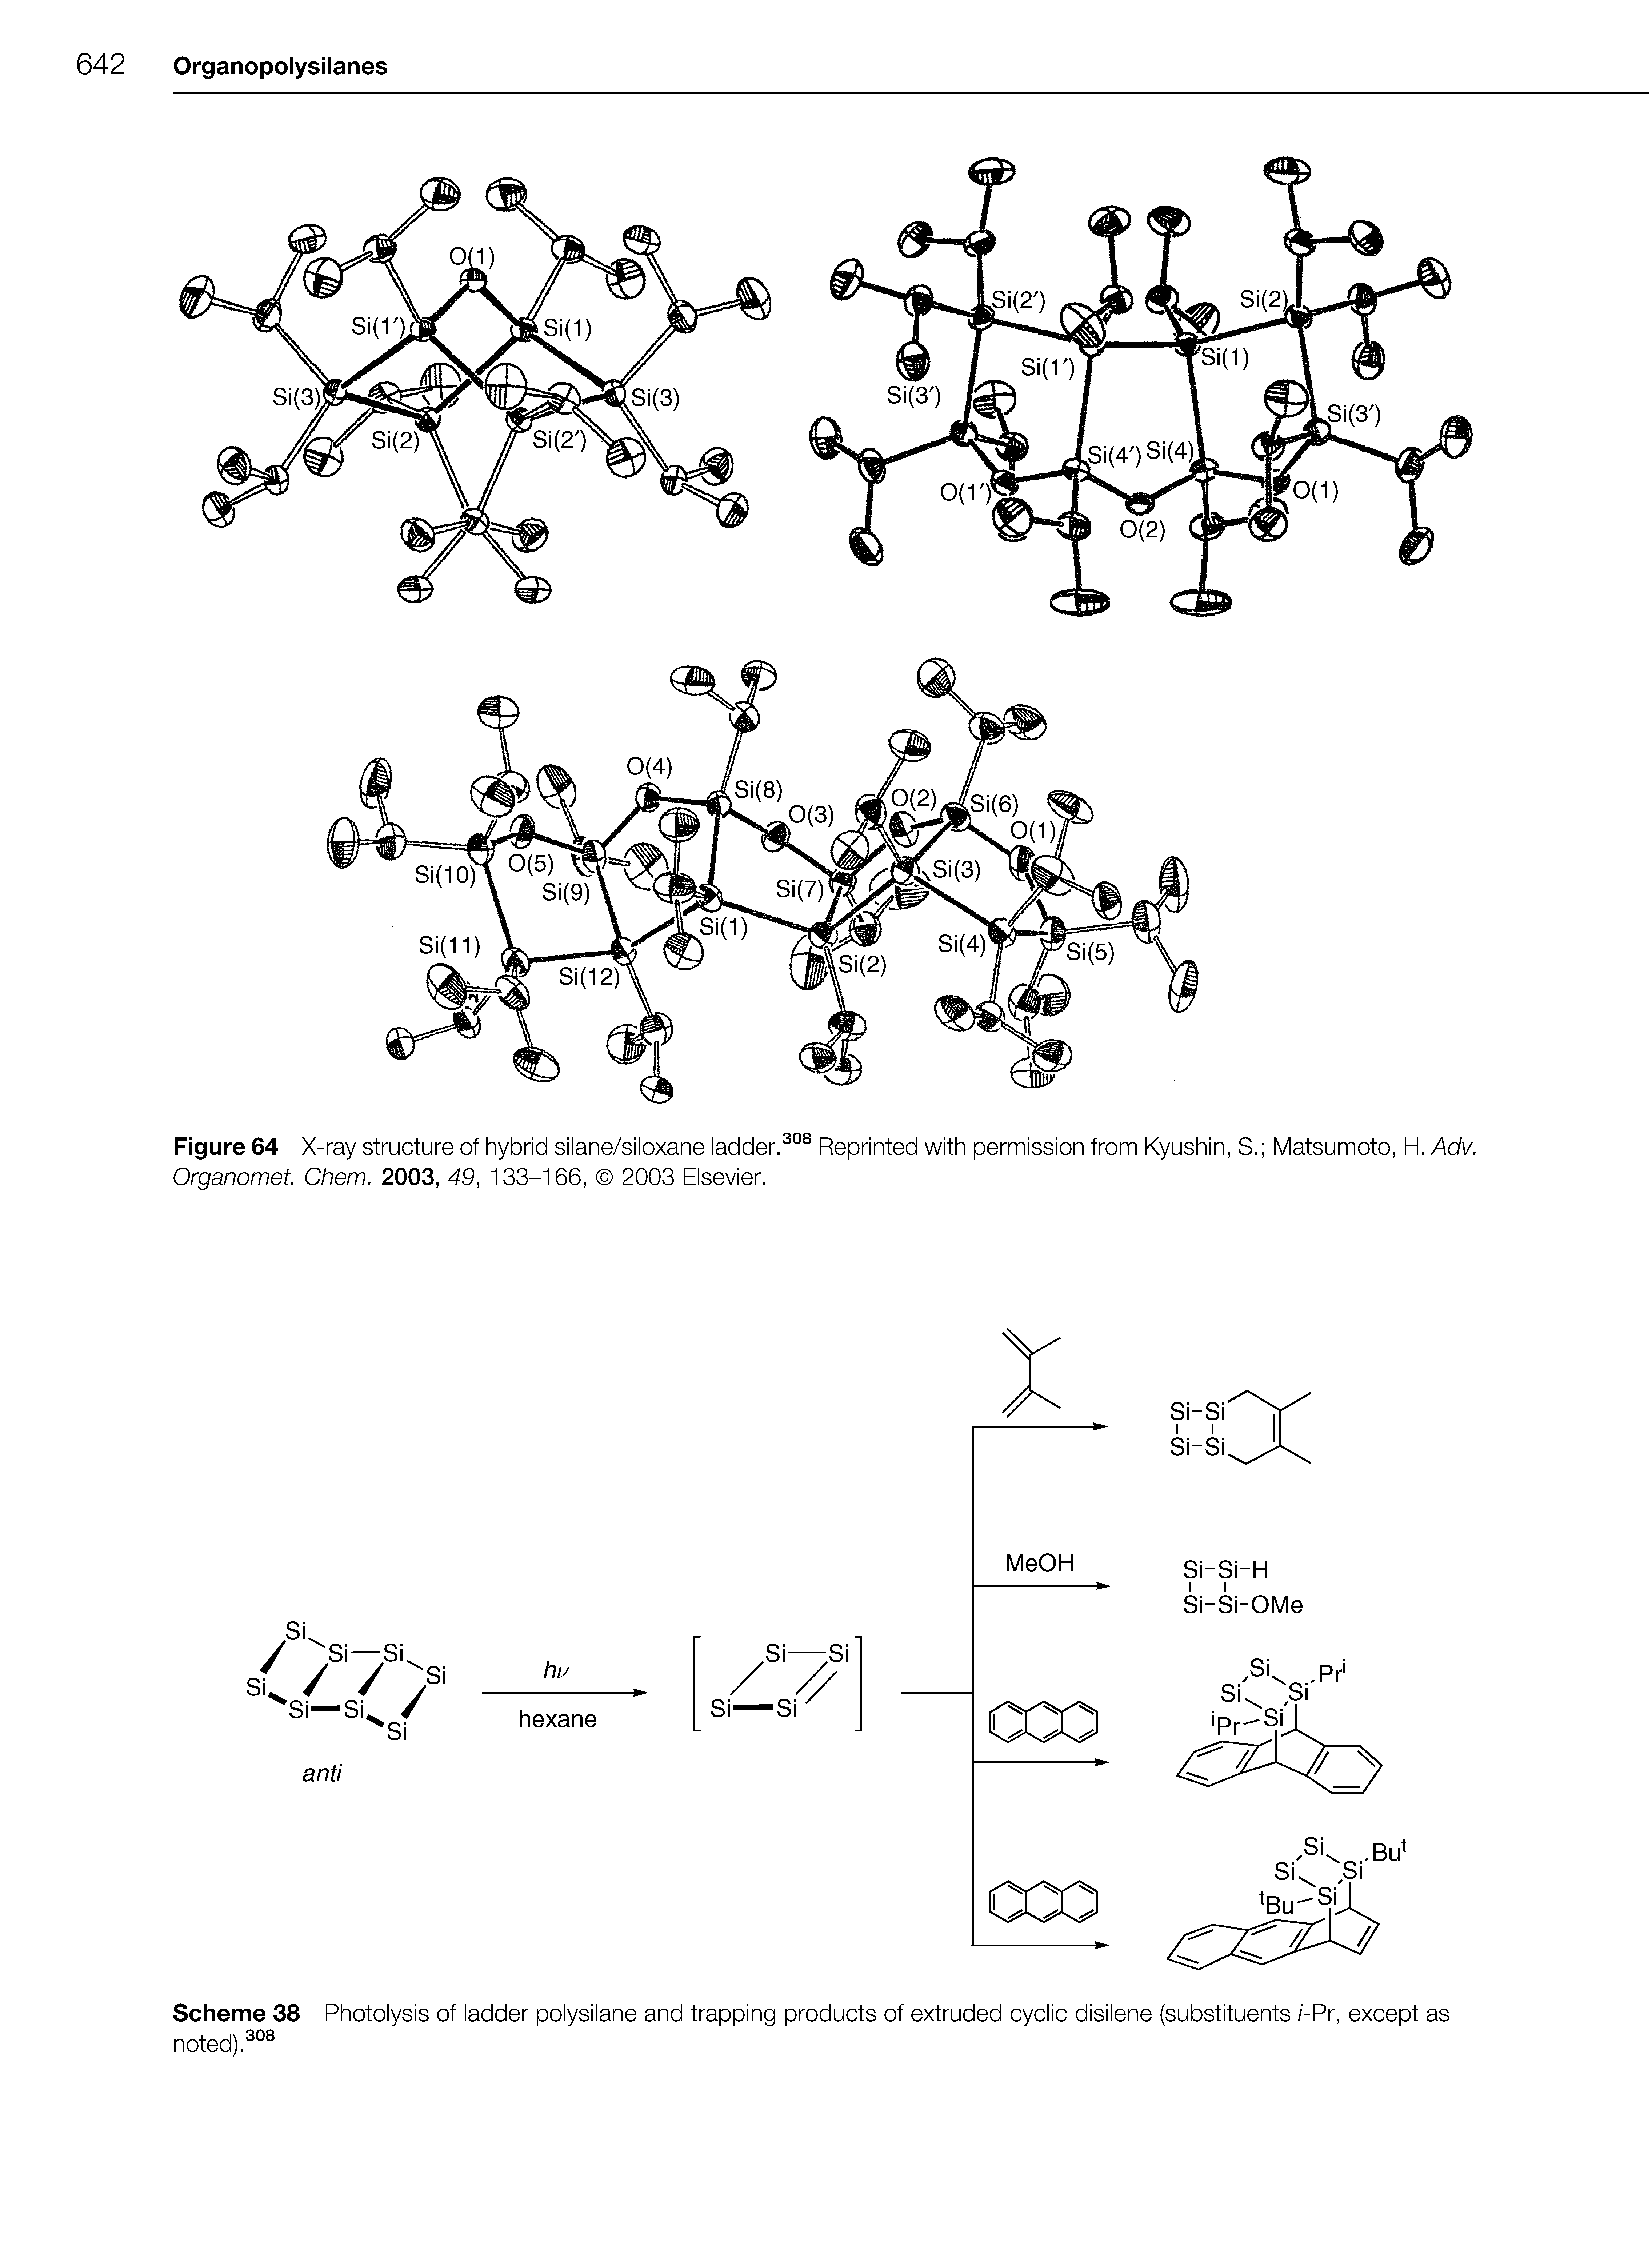 Scheme 38 Photolysis of ladder polysilane and trapping products of extruded cyclic disilene (substituents /-Pr, except as noted)308...